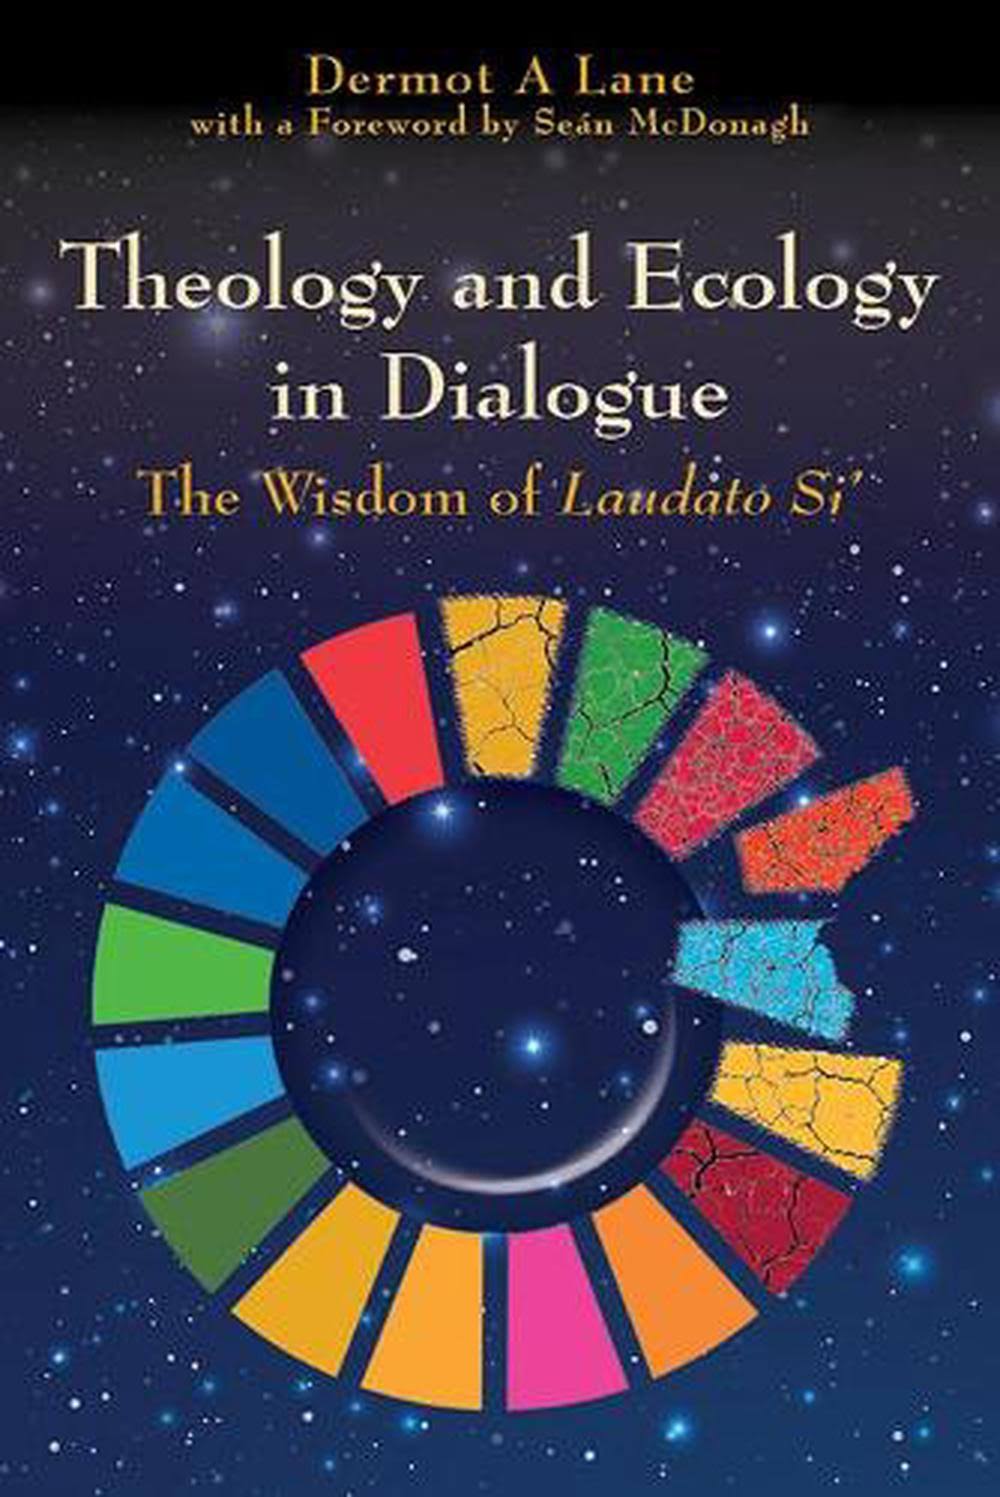 Theology and Ecology in Dialogue by Dermot Lane